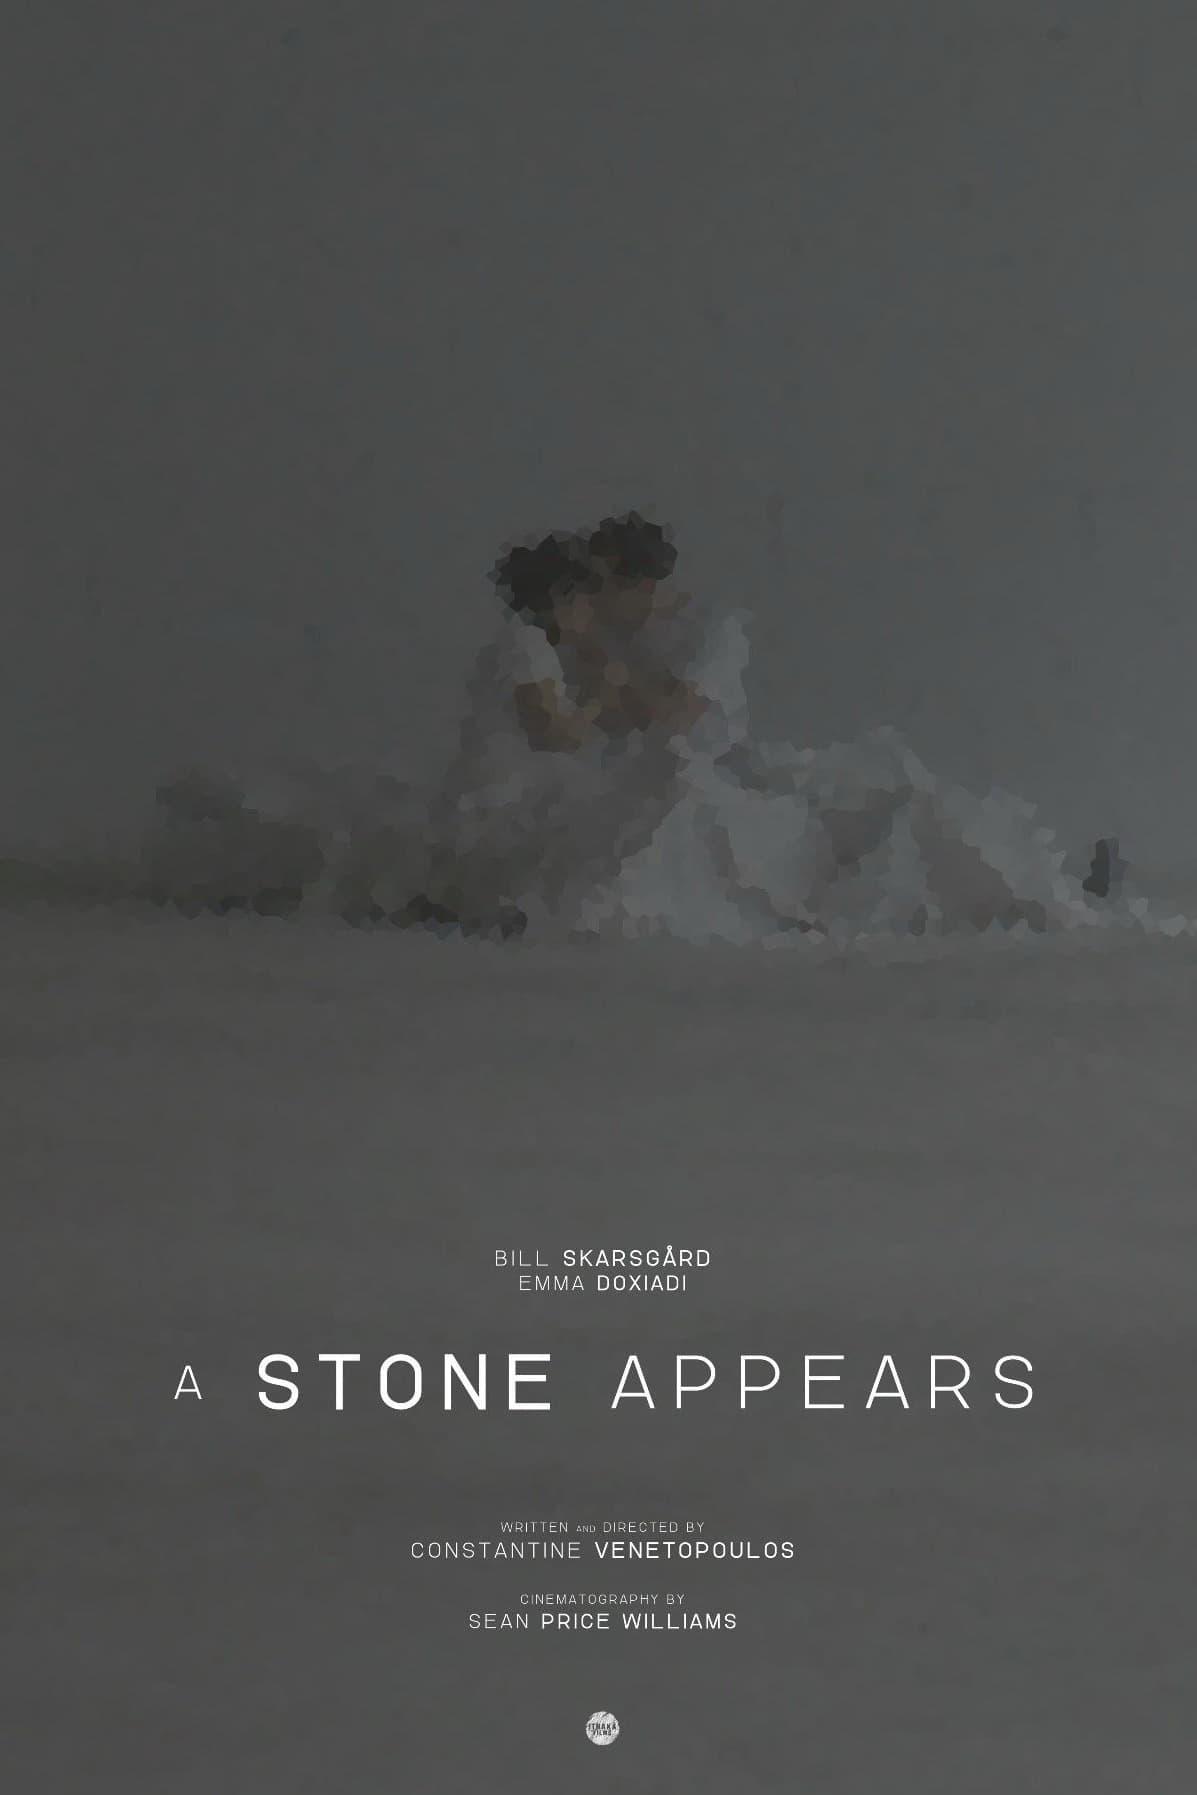 A Stone Appears poster